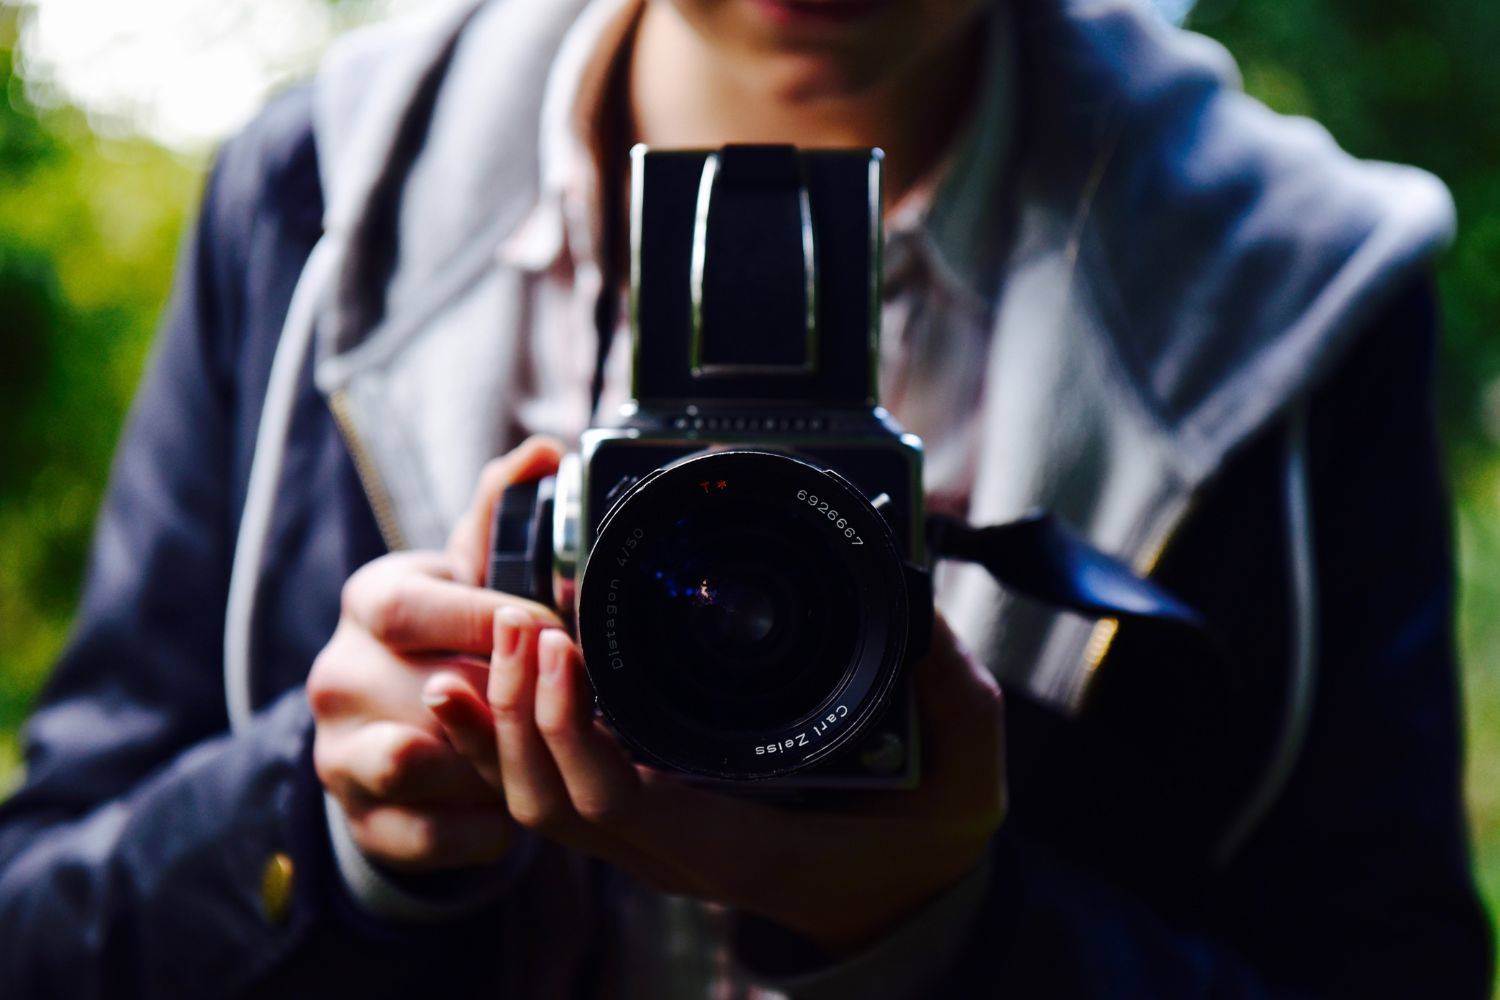 man takes hasselblad camera in hands Photo by Joe Ridley Beth Martin on unsplash